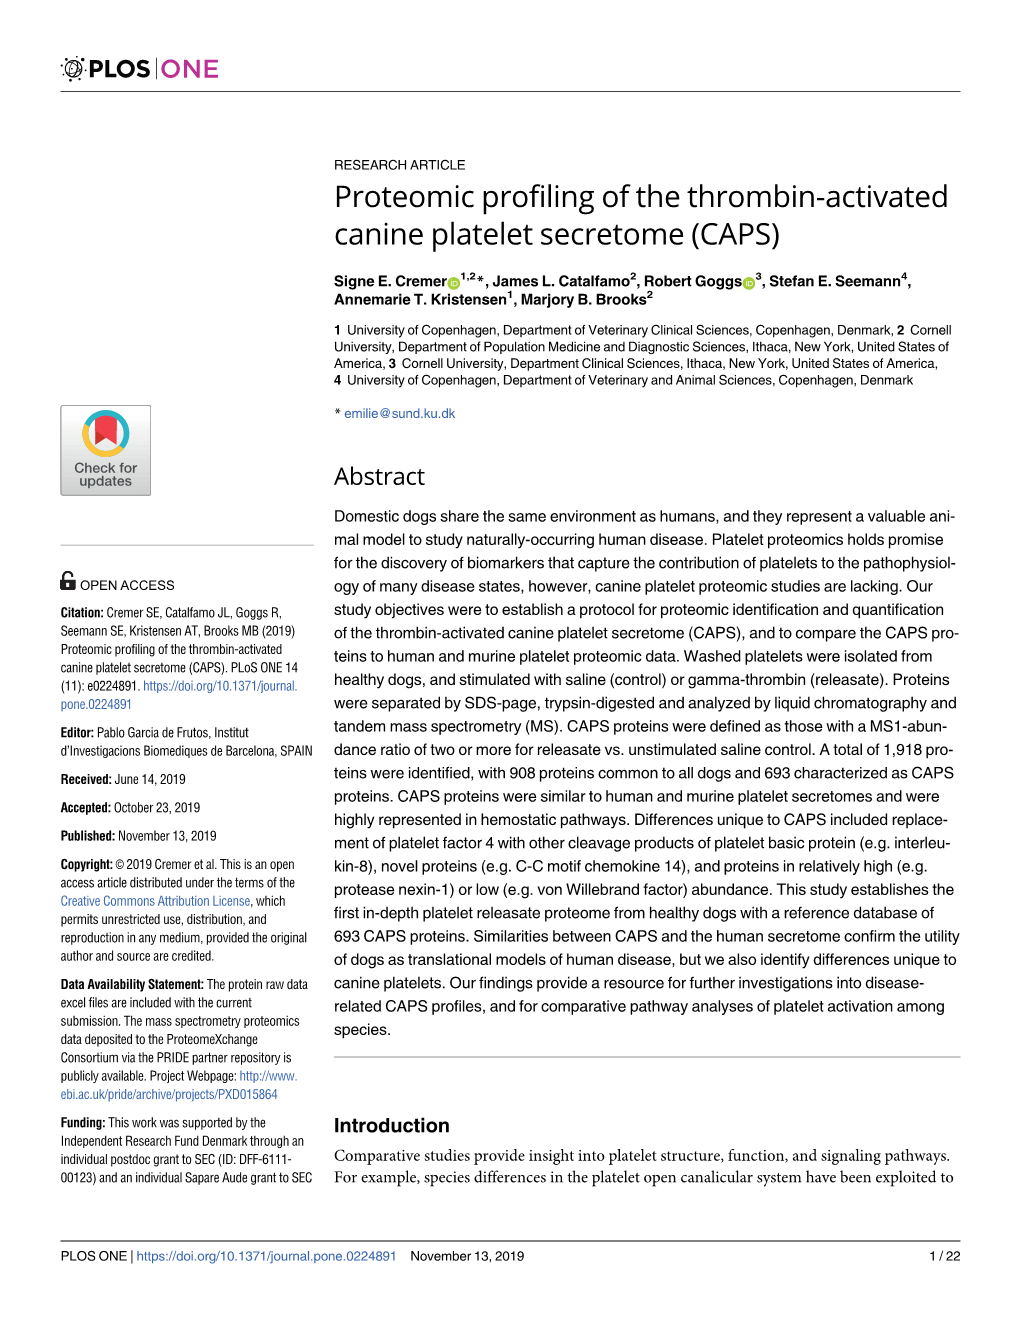 Proteomic Profiling of the Thrombin-Activated Canine Platelet Secretome (CAPS)